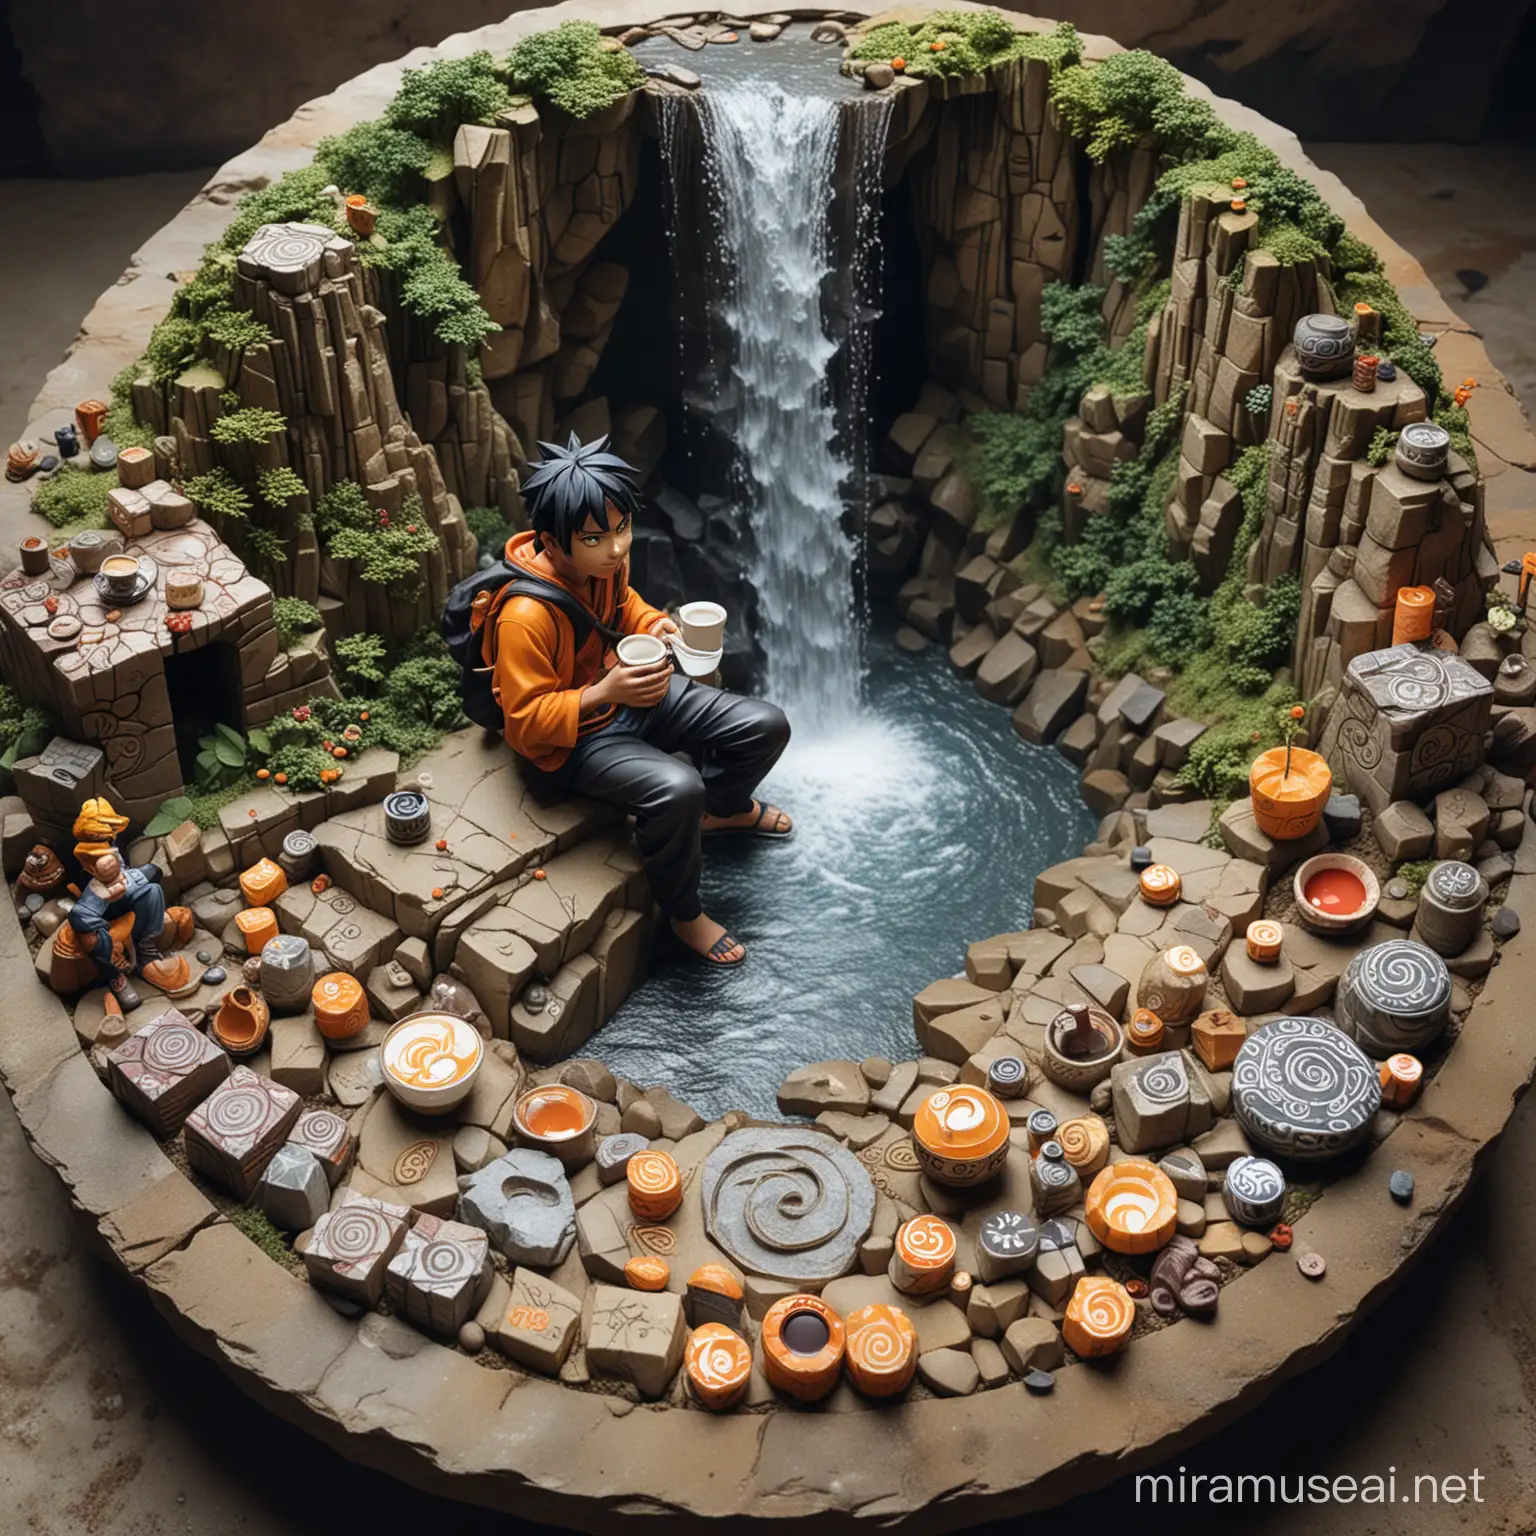 Indian Youth Enjoying Batik and Coffee with Naruto Miniatures by a Mountain Waterfall